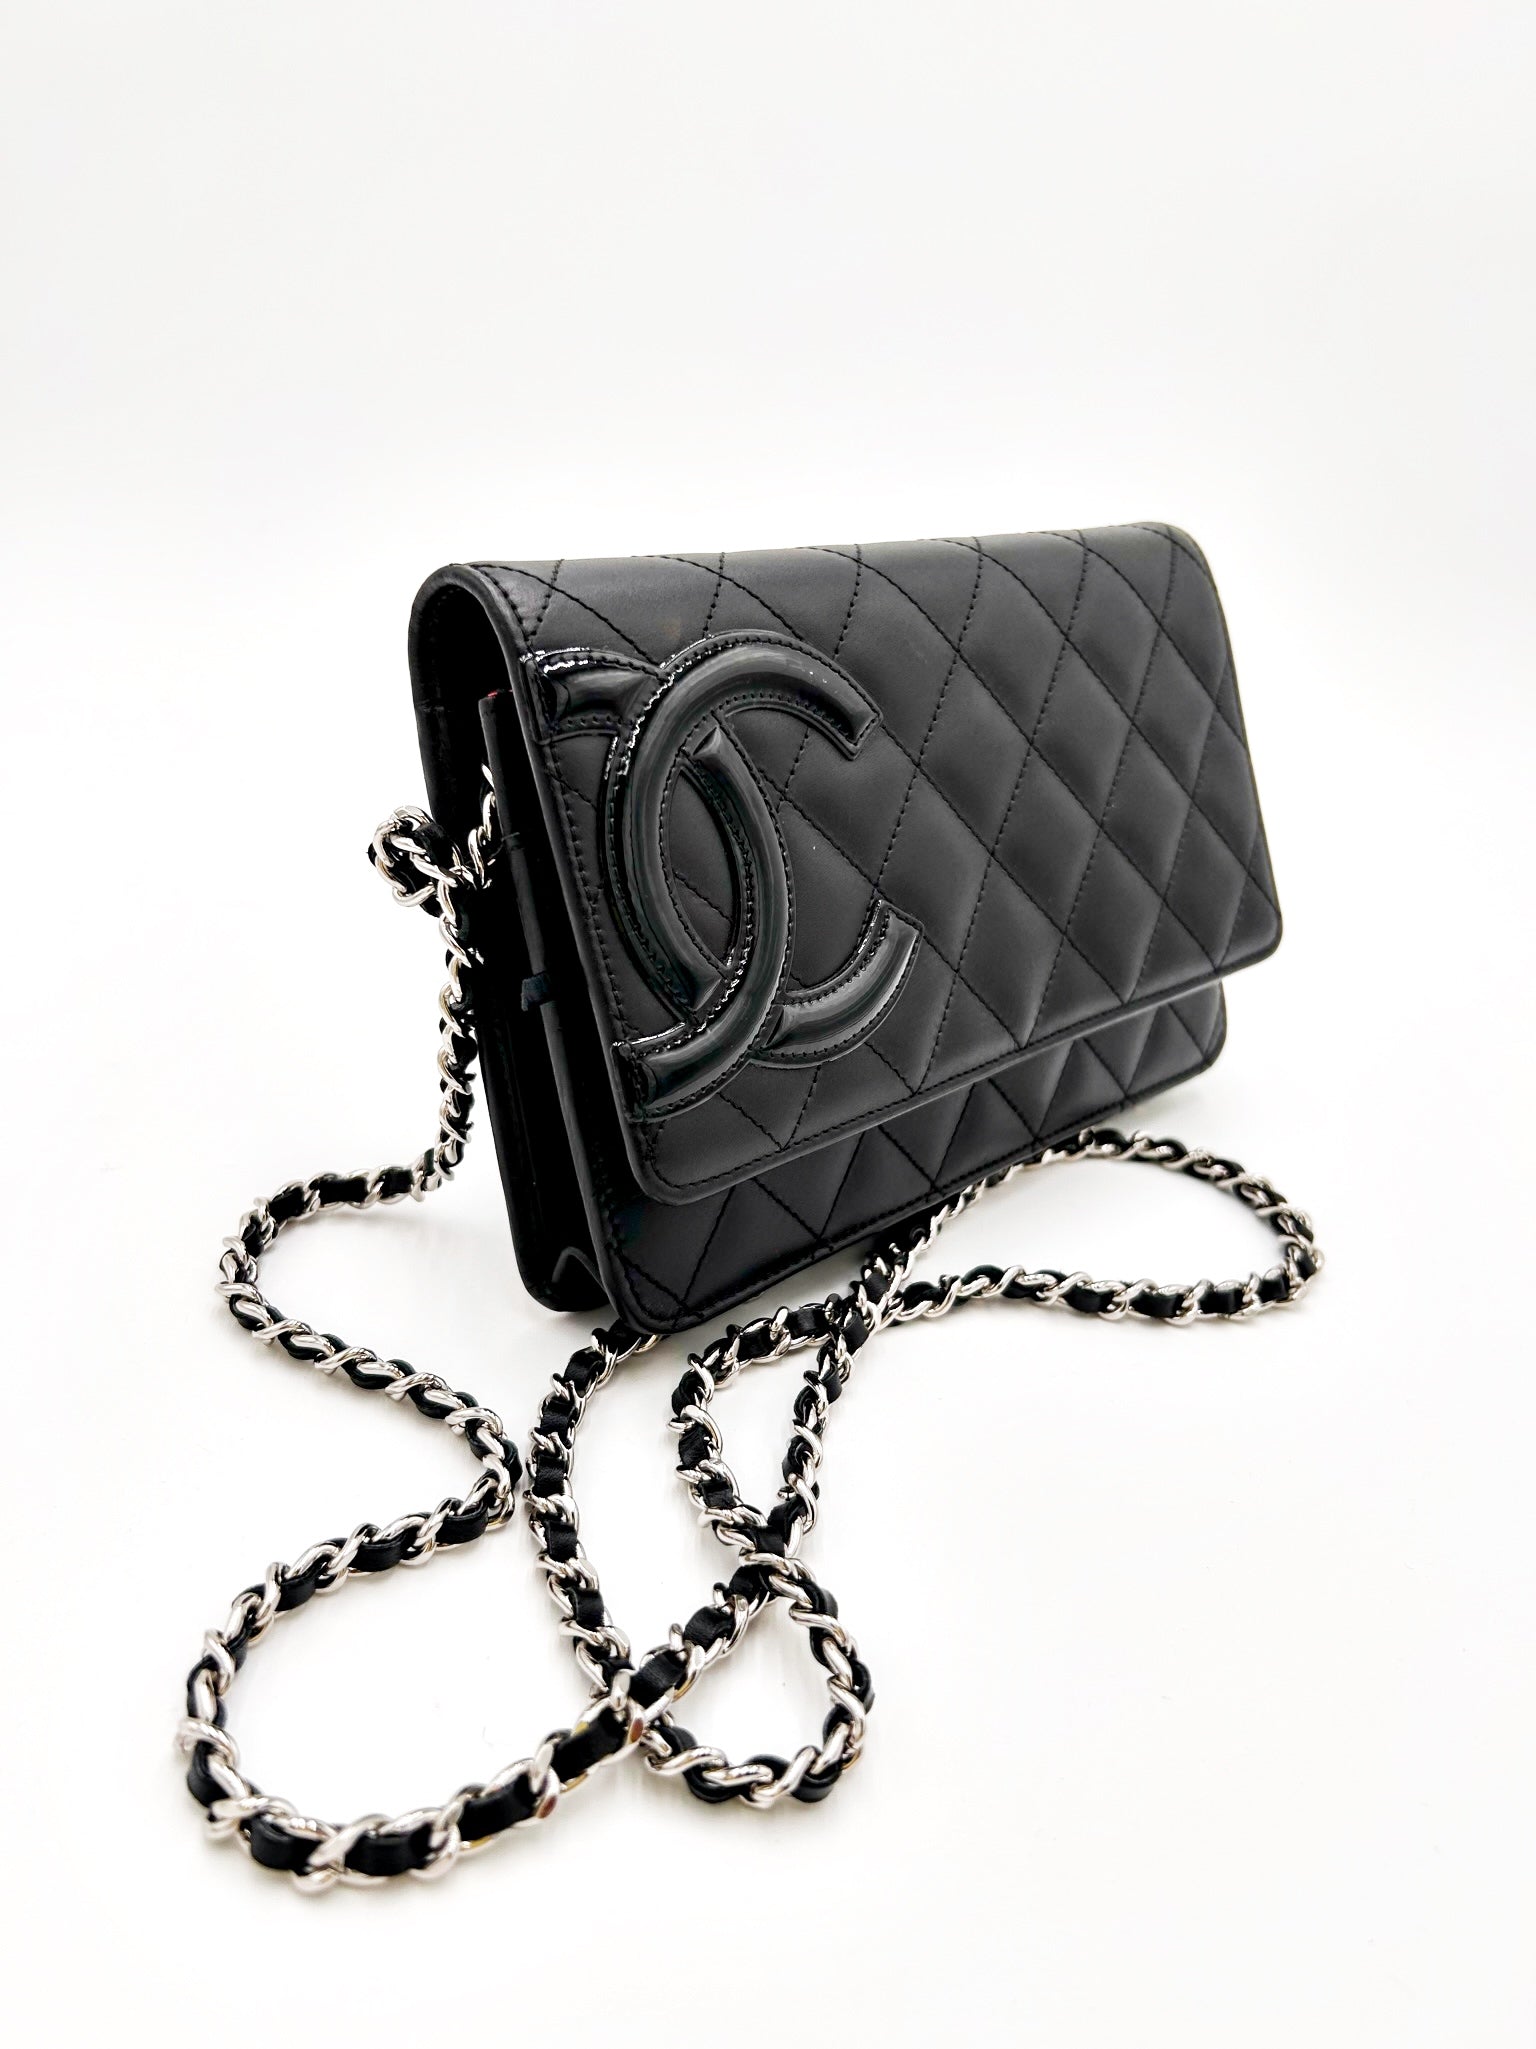 CHANEL BLACK WOC (WALLET ON A CHAIN)